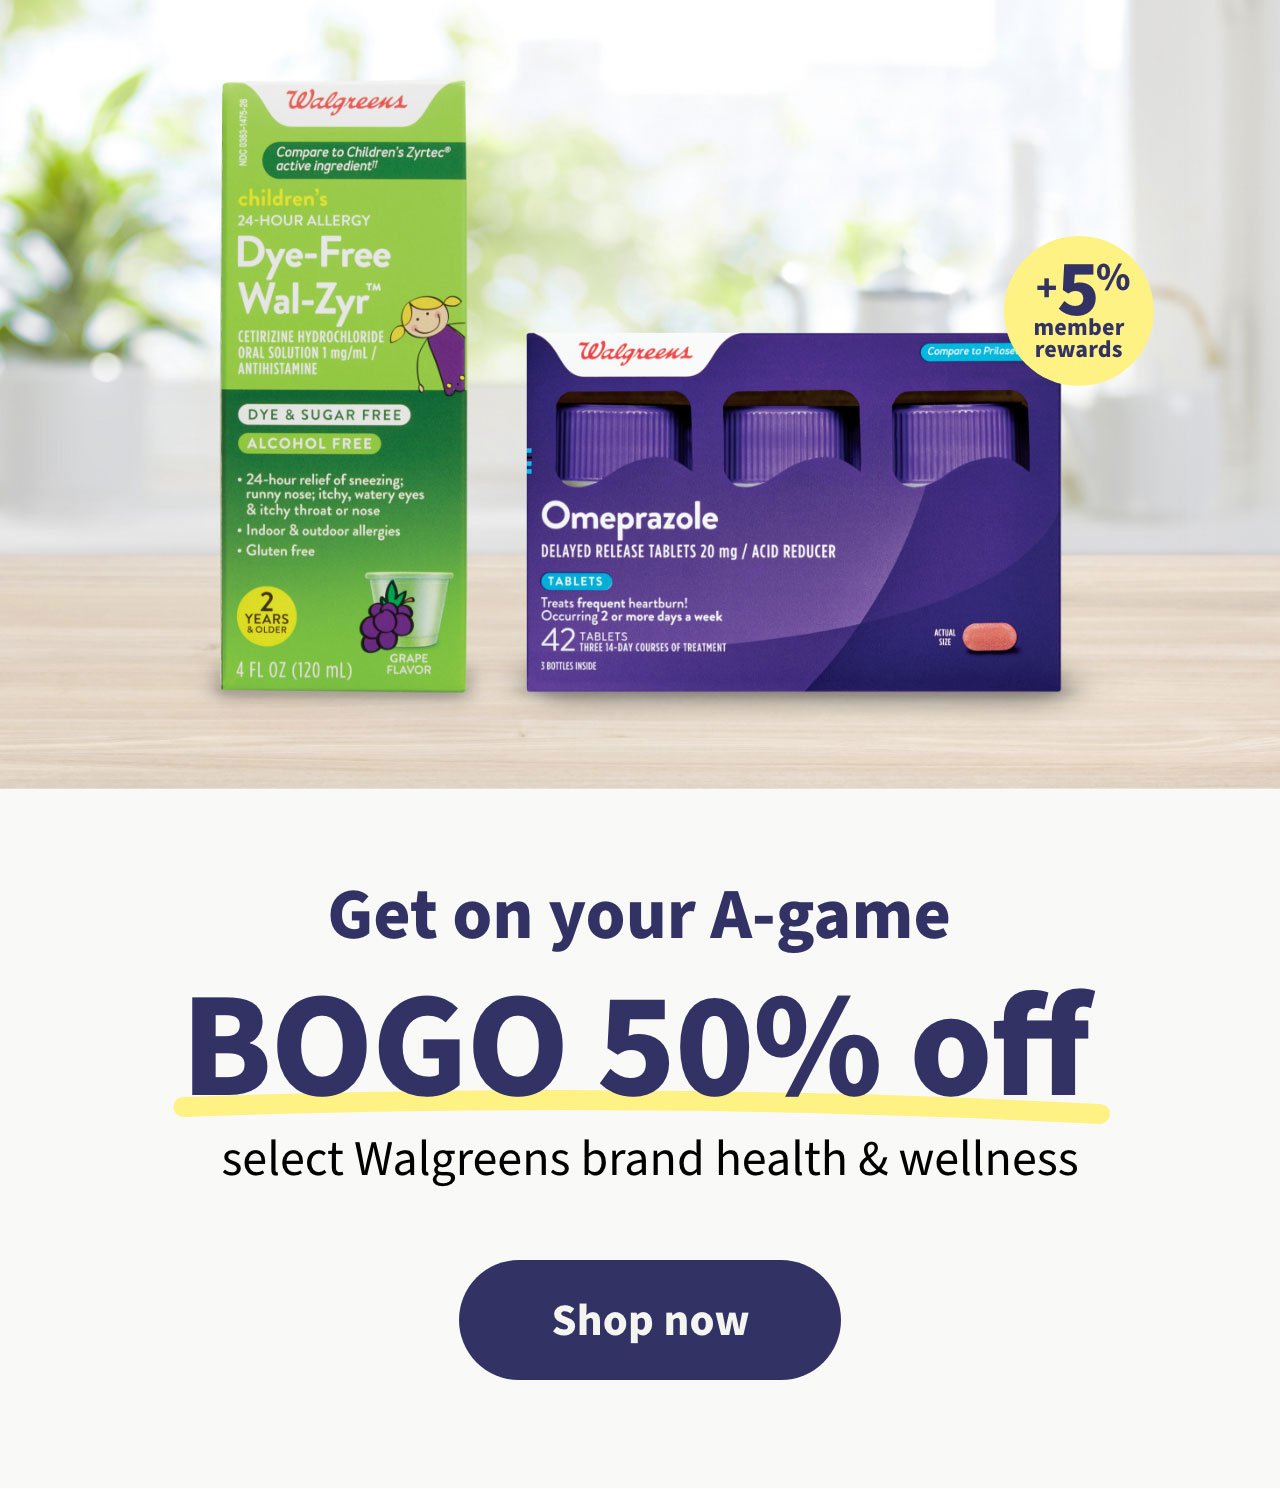 Get on your A-game. BOGO 50% off select Walgreens brand health & wellness. Shop now